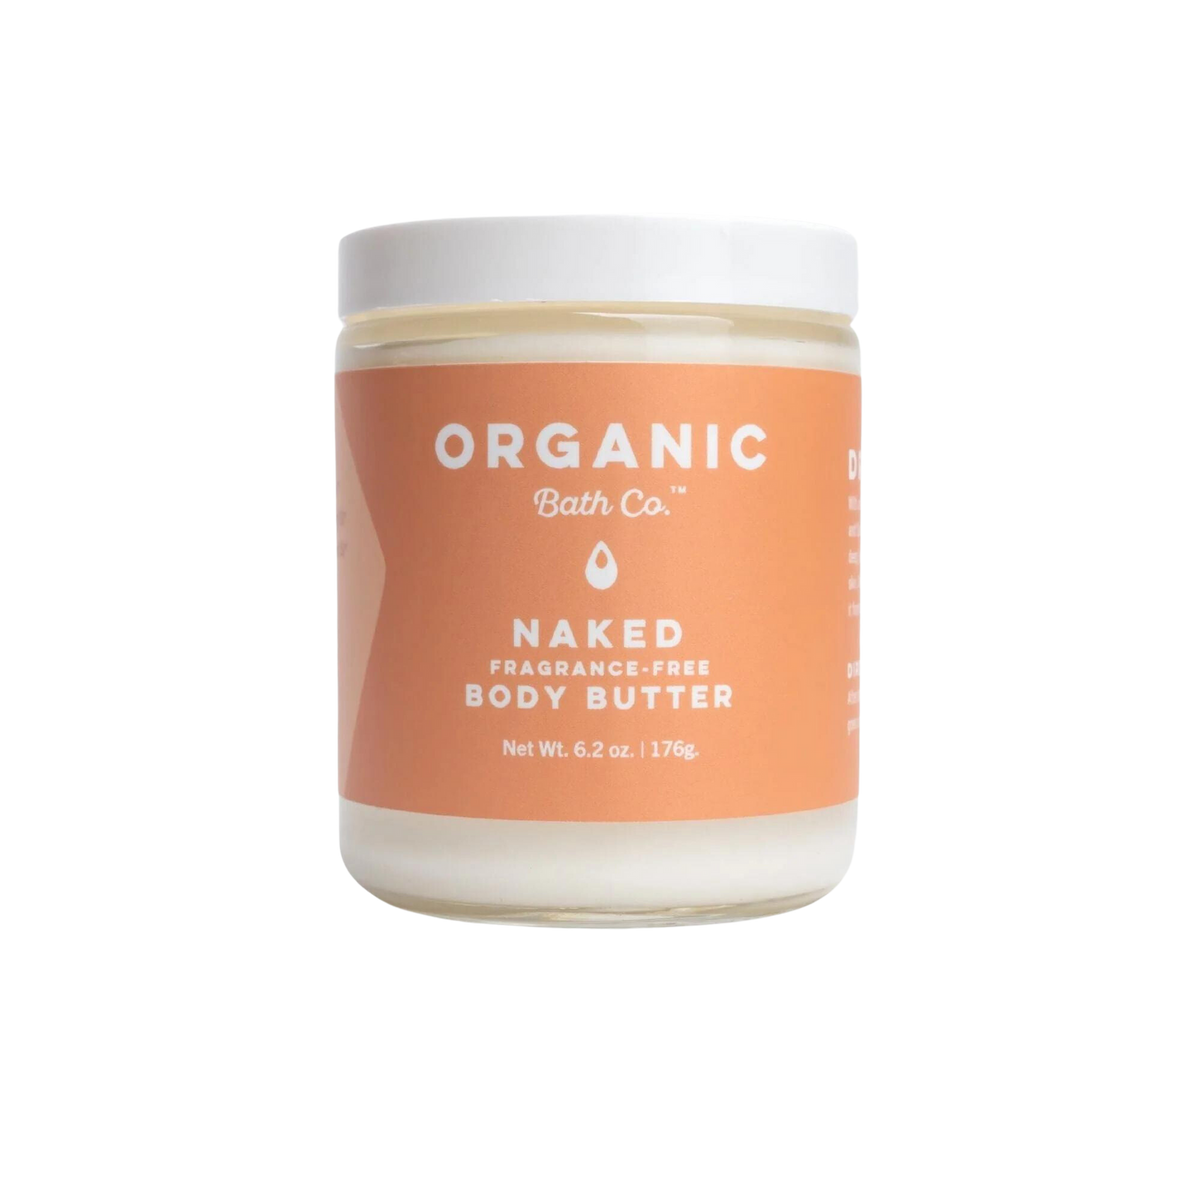 Organic Bath Co. Naked Organic Unscented Body Butter Regular and Travel-sized